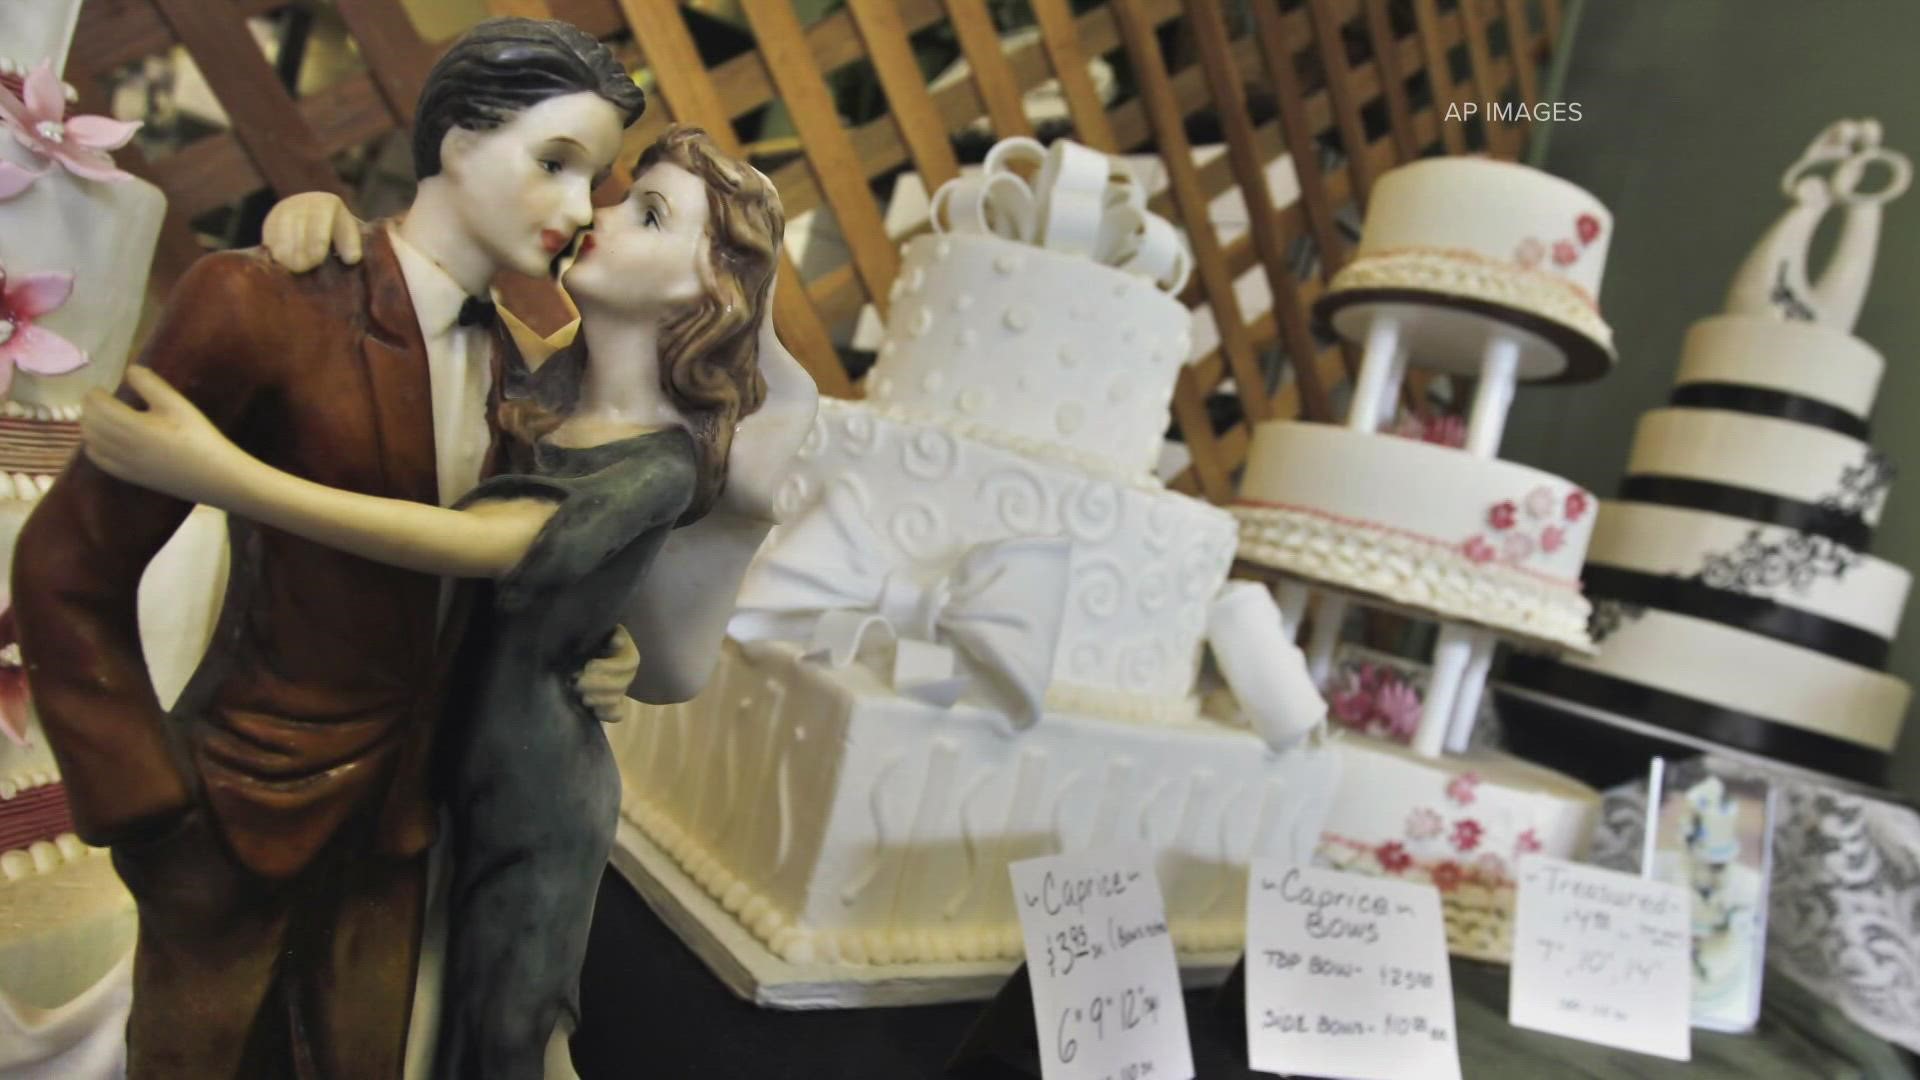 Today, a state court of appeals upheld a lower court ruling Masterpiece Cake Shop violated the state's anti-discrimination laws.